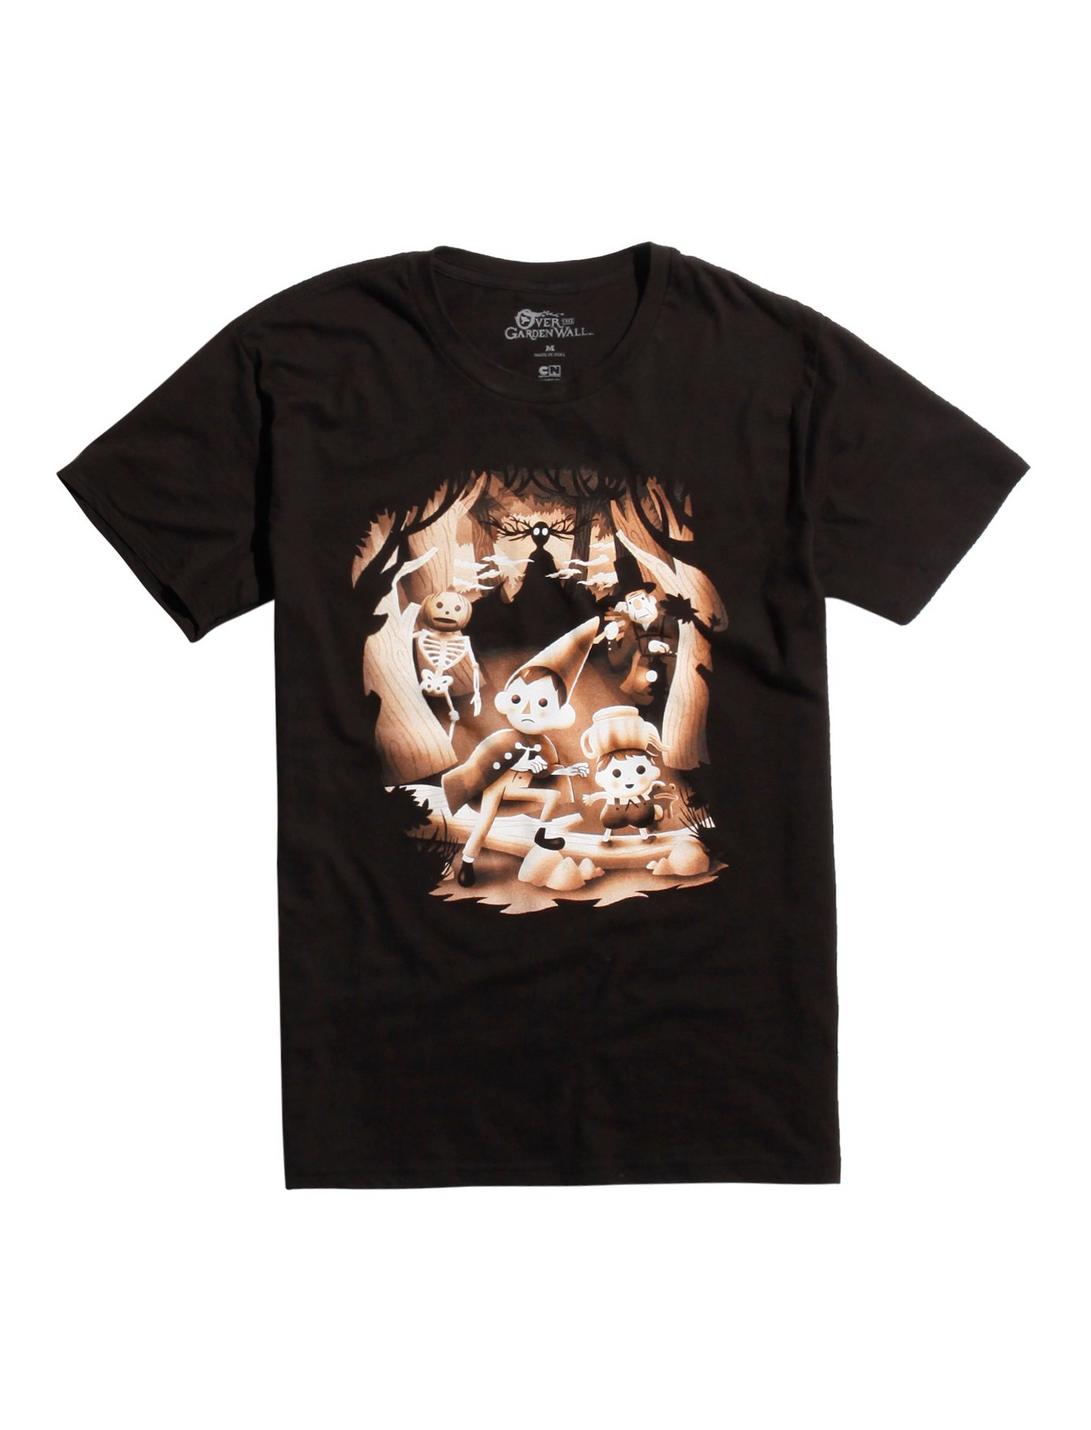 Over The Garden Wall Storybook T-Shirt, BLACK, hi-res